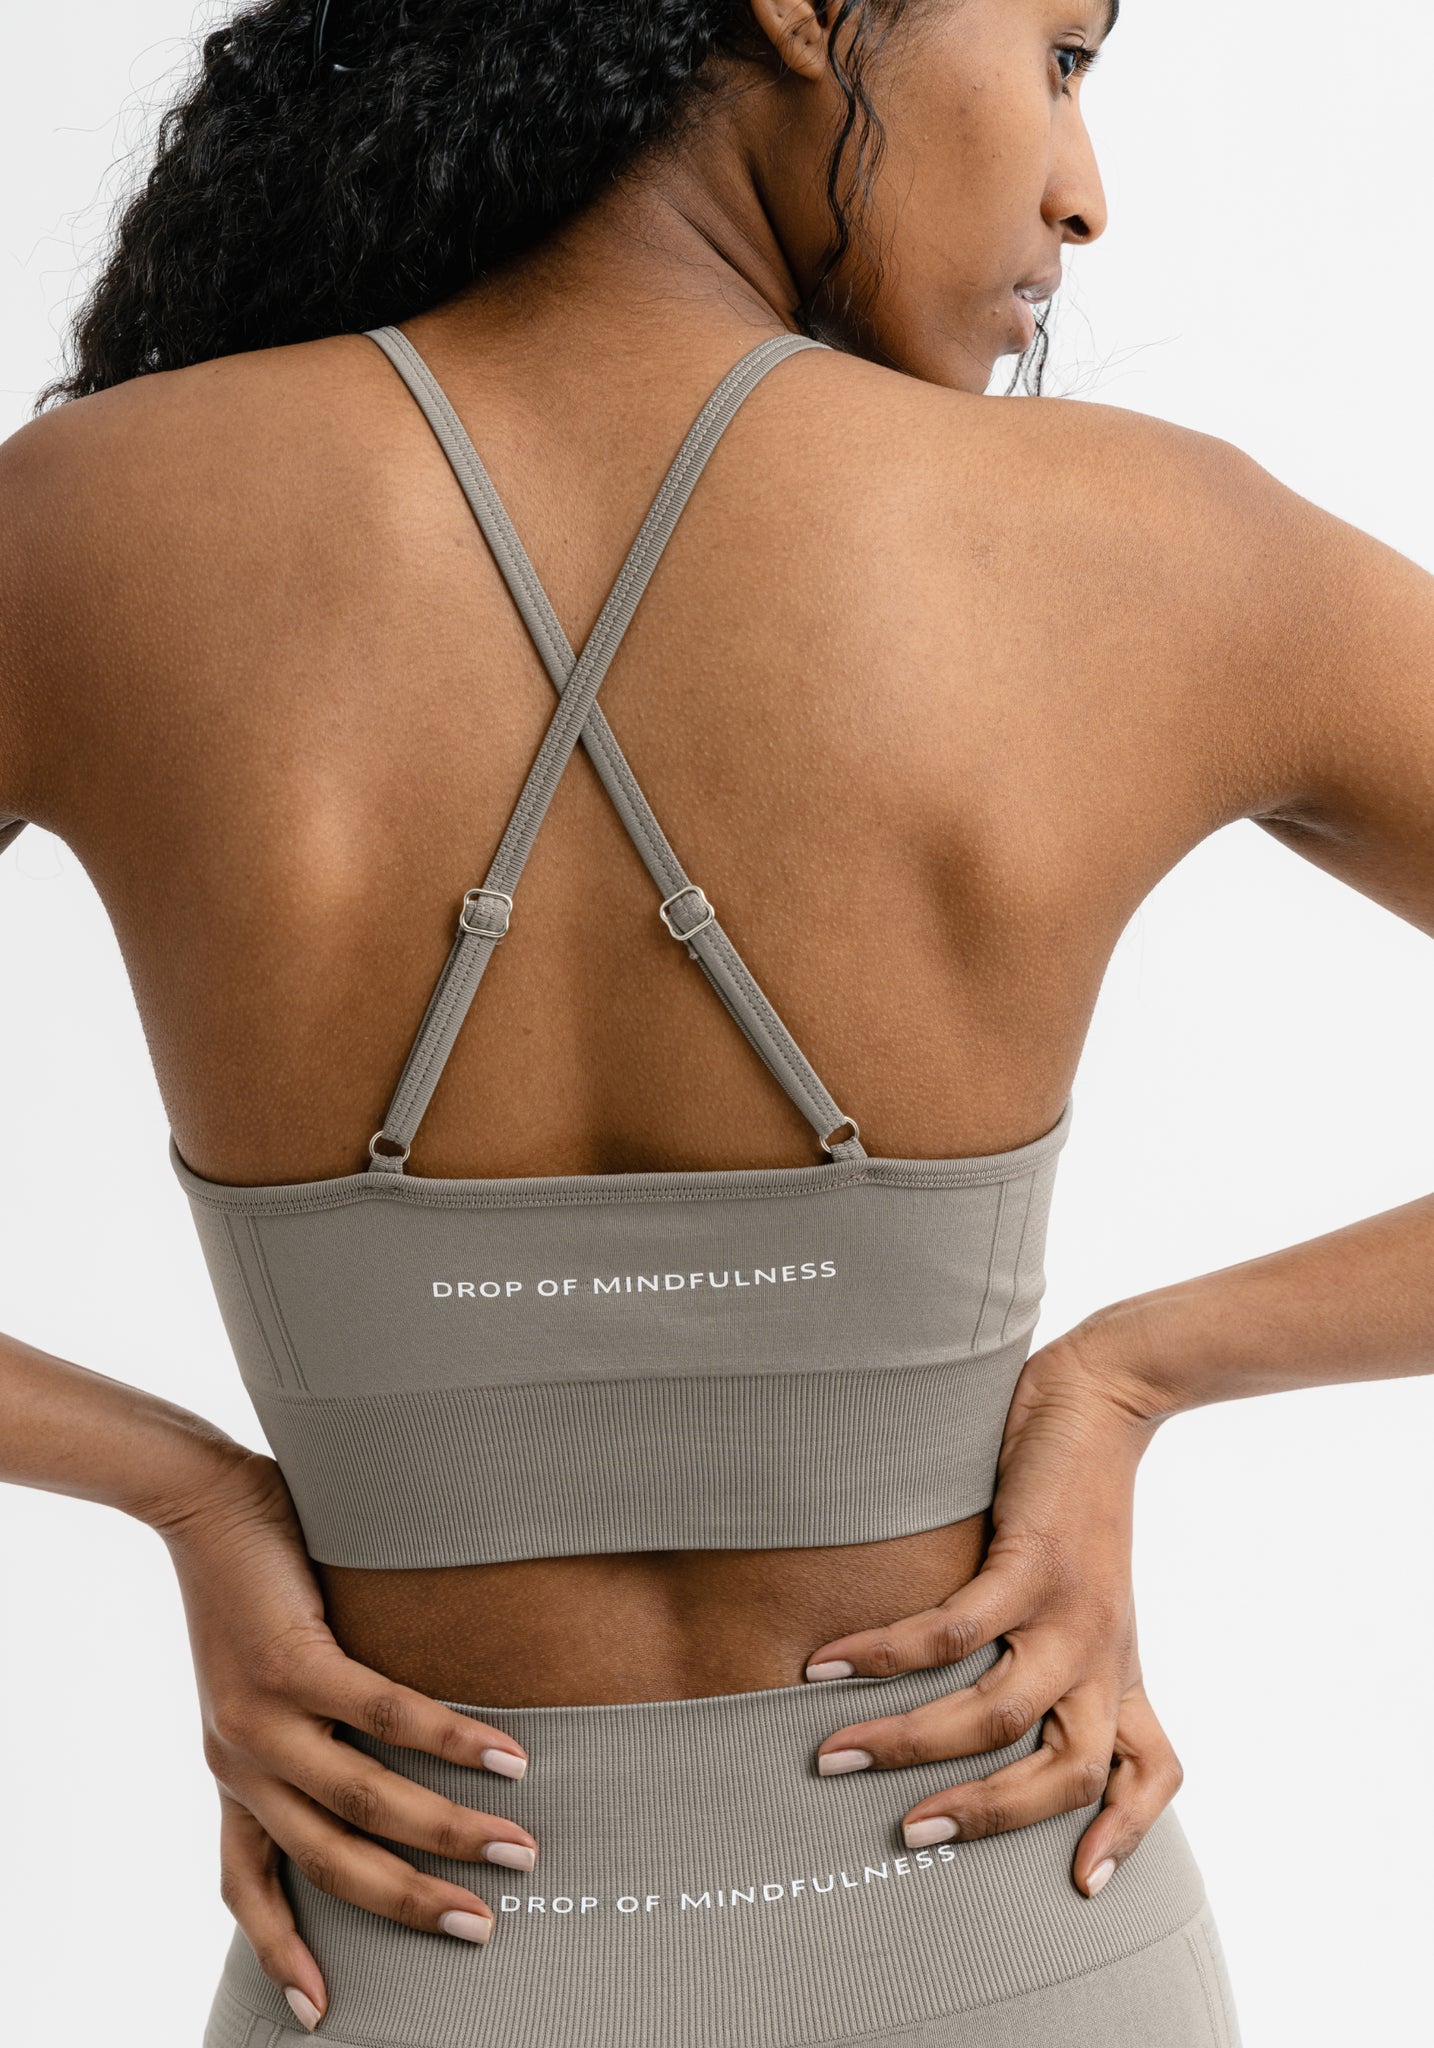 Sports bras from Drop of Mindfulness – Drop Of Mindfulness